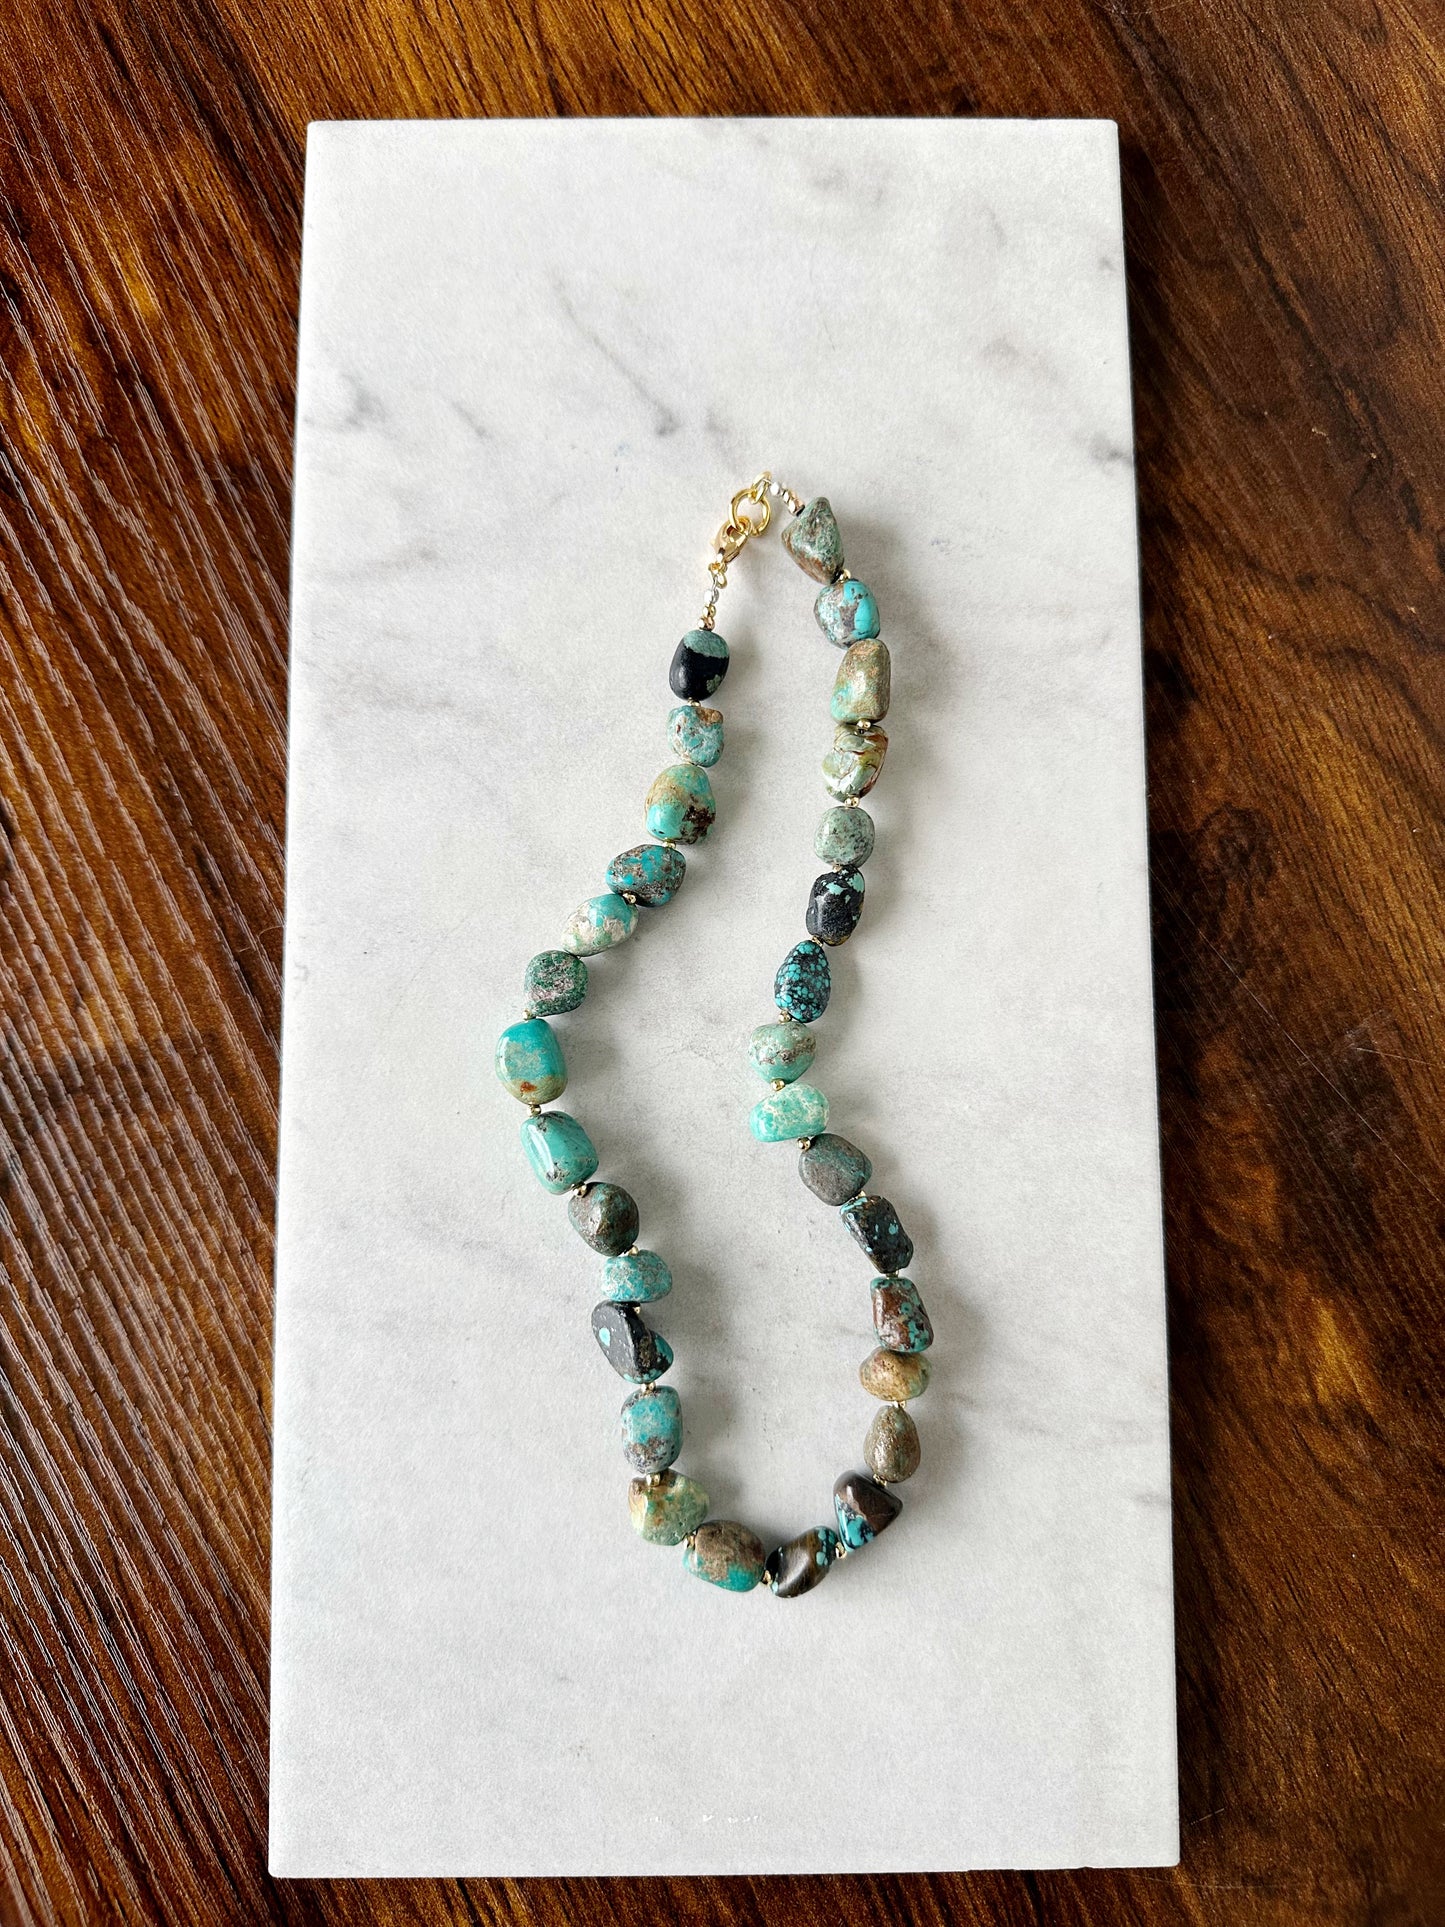 Carter Chunky Turquoise Necklace